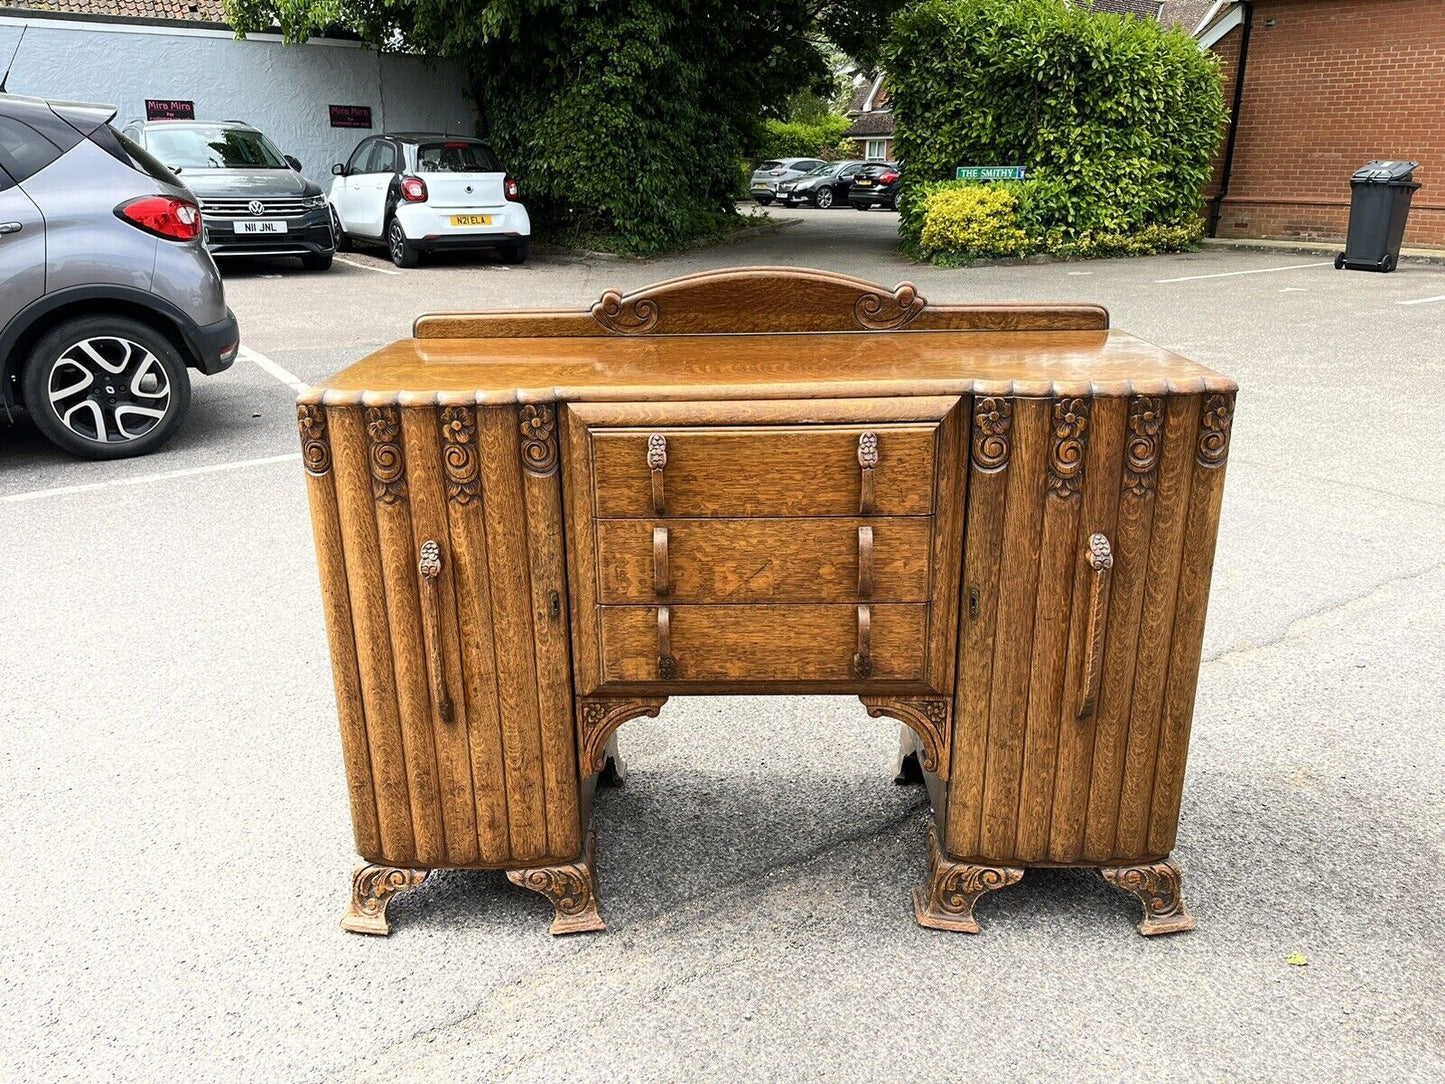 Art Deco Oak Sideboard. Circa 1930’s. Carved With Flowers . Lots Of Storage.